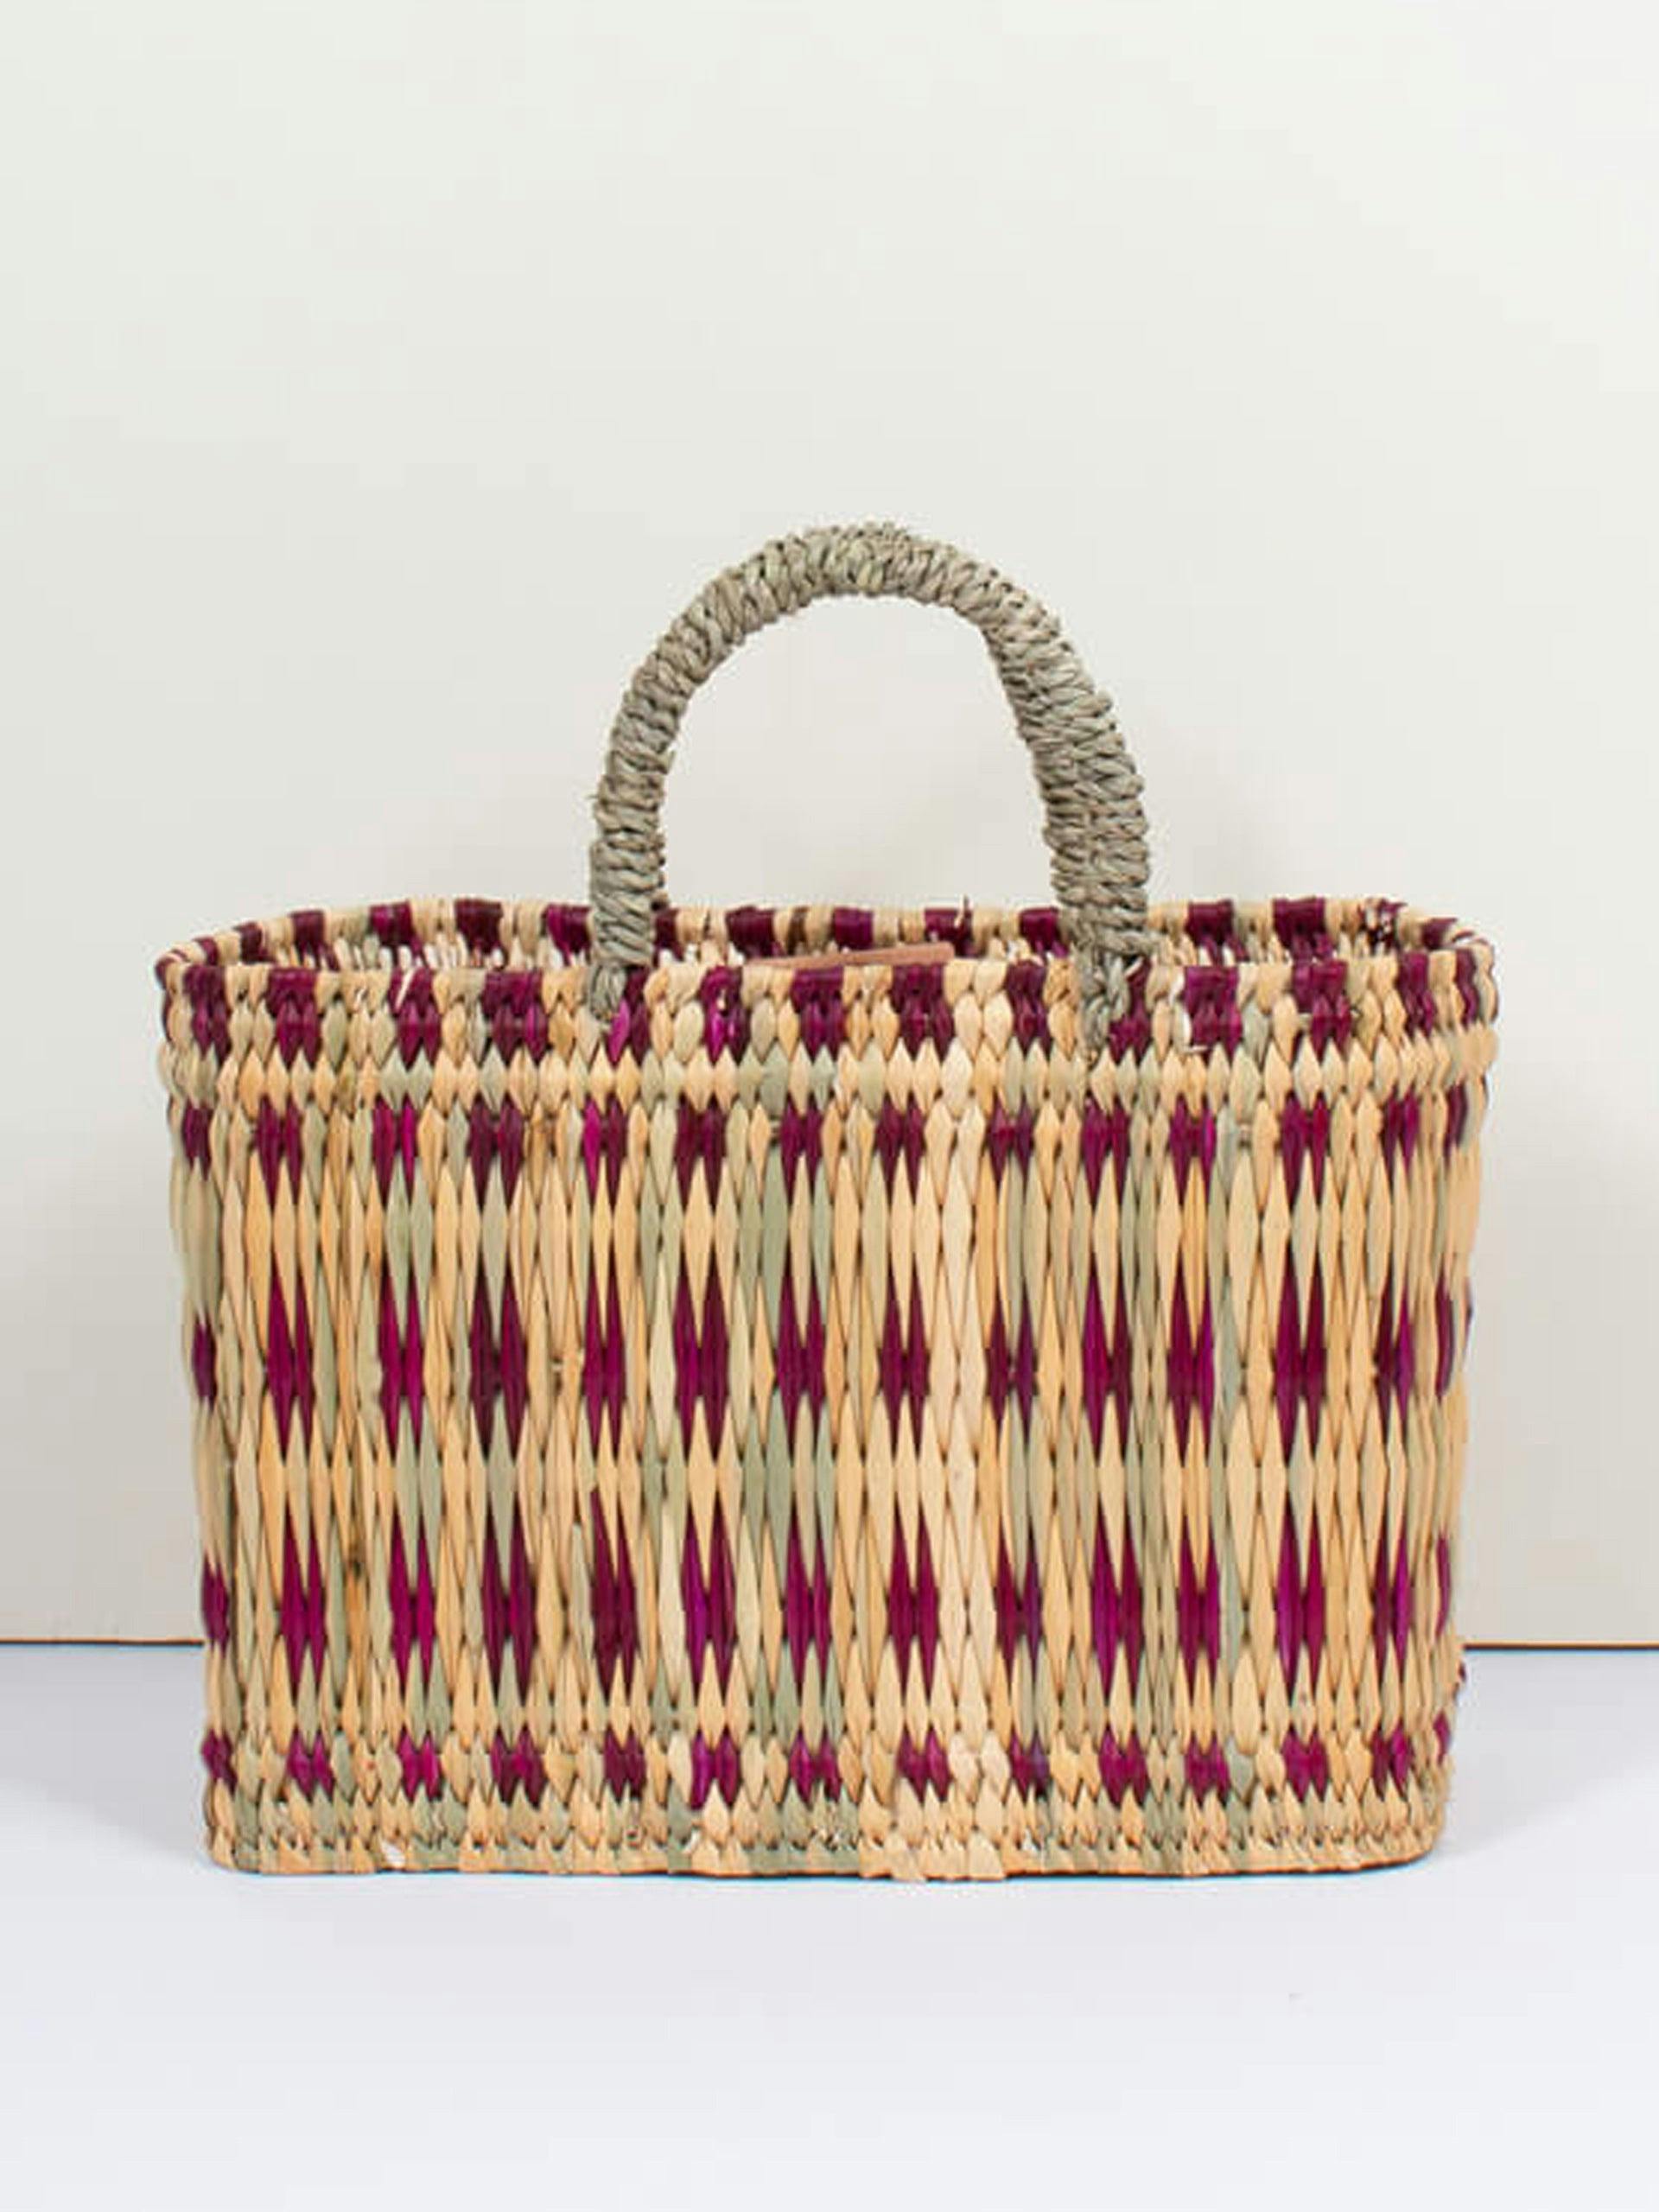 Woven reed basket